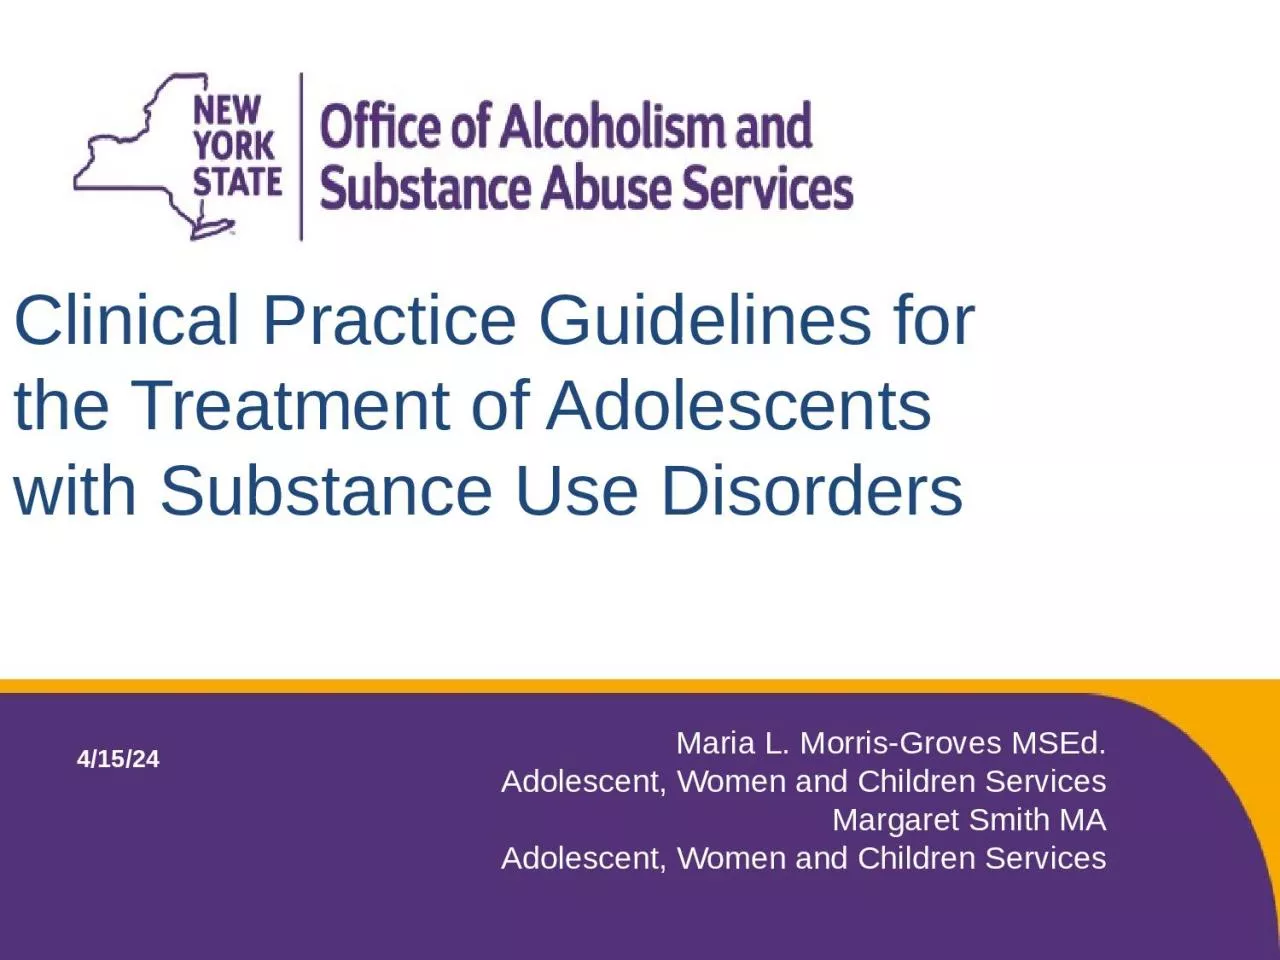 Clinical Practice Guidelines for the Treatment of Adolescents with Substance Use Disorders